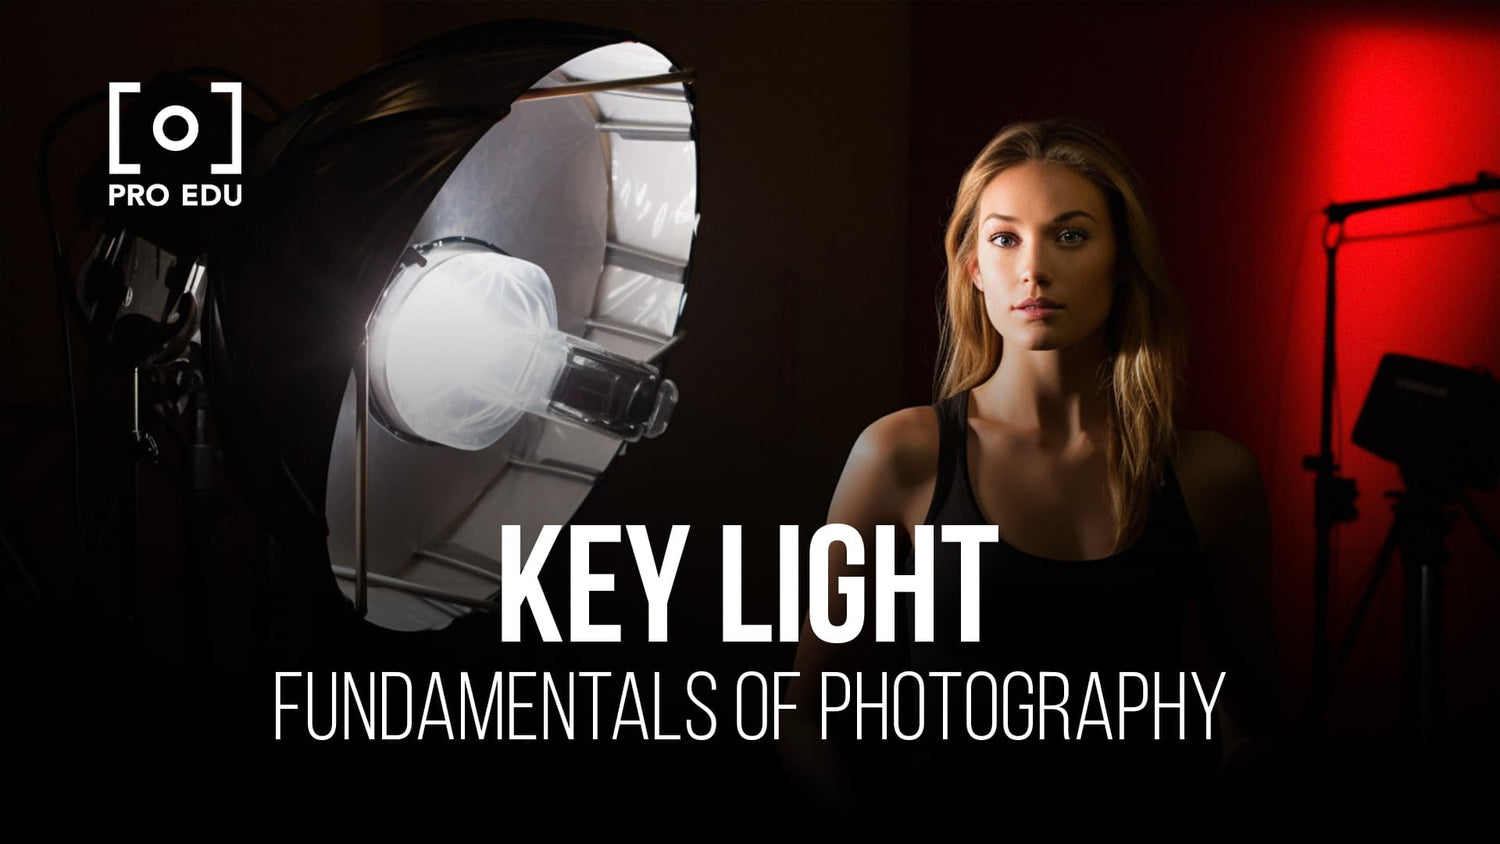 Shaping your subject's look with key light techniques in photography